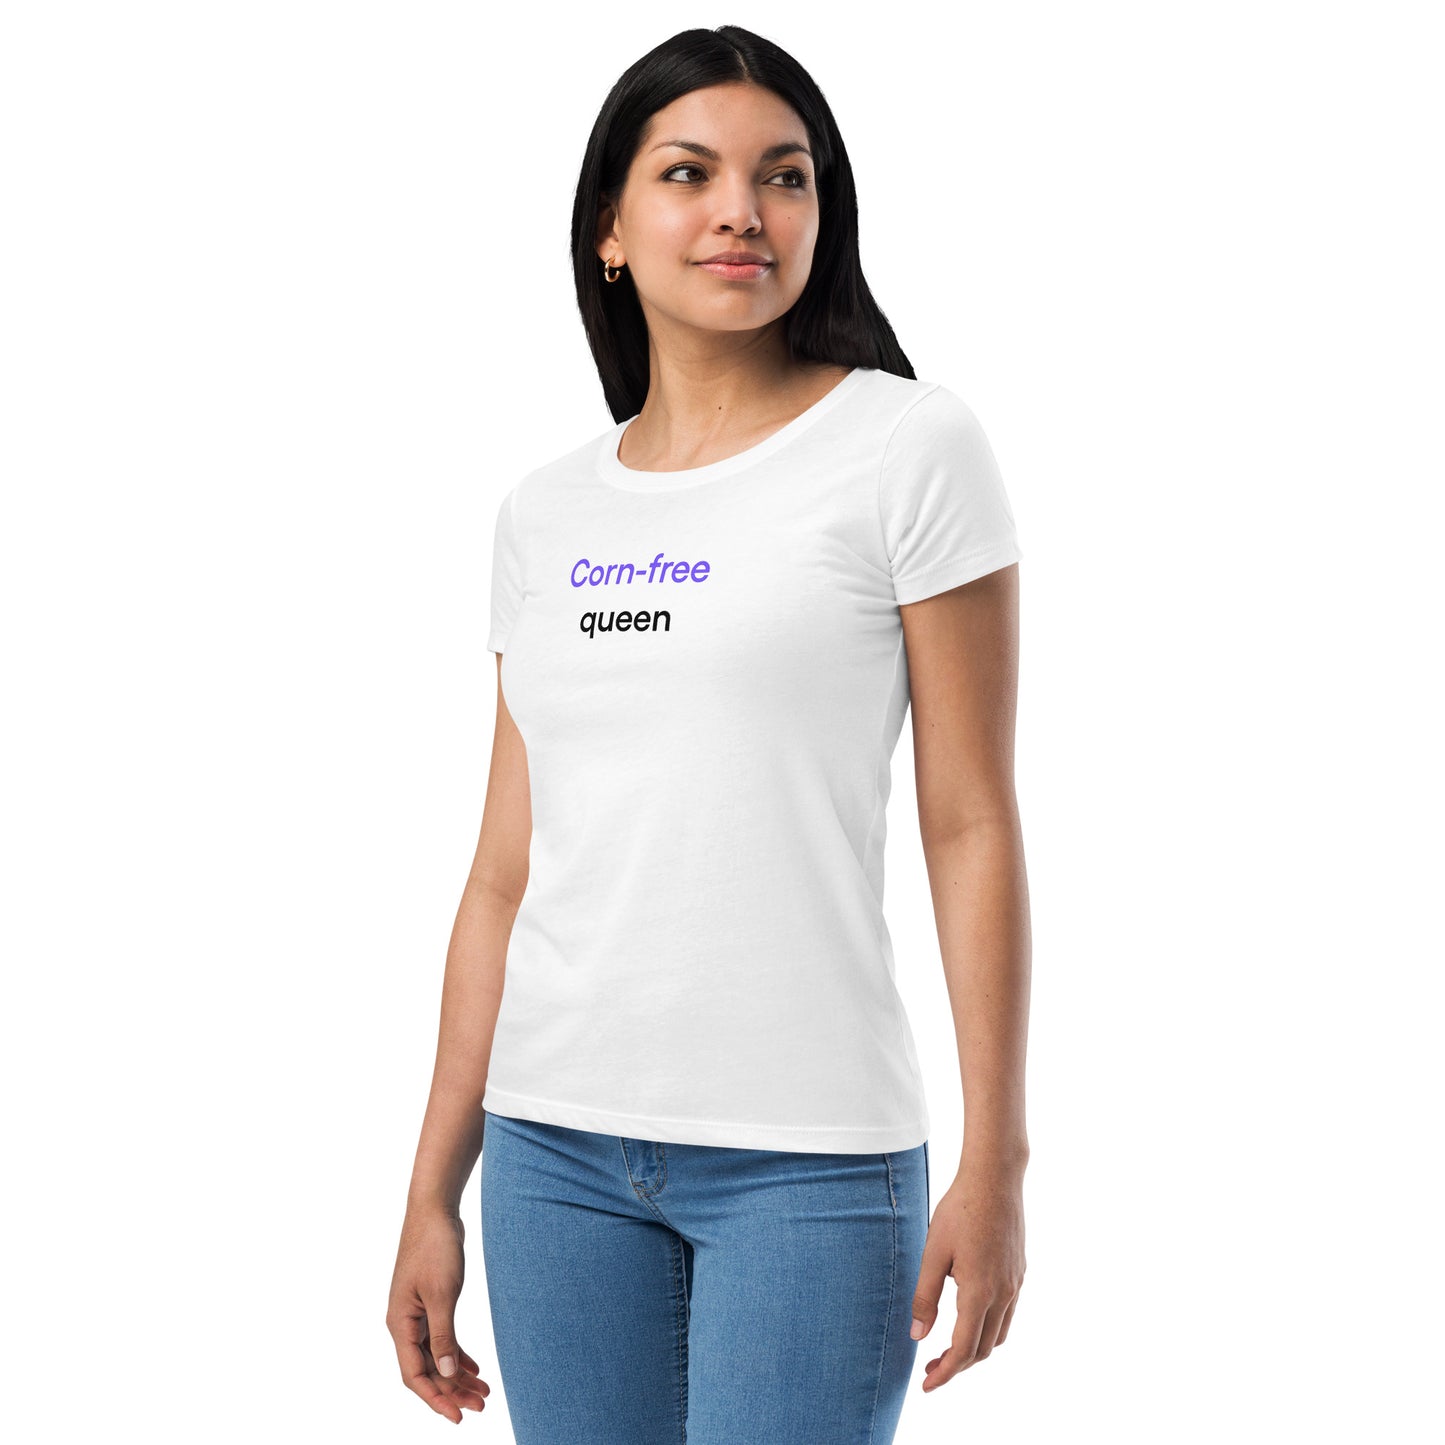 Corn-free queen | Women’s fitted t-shirt